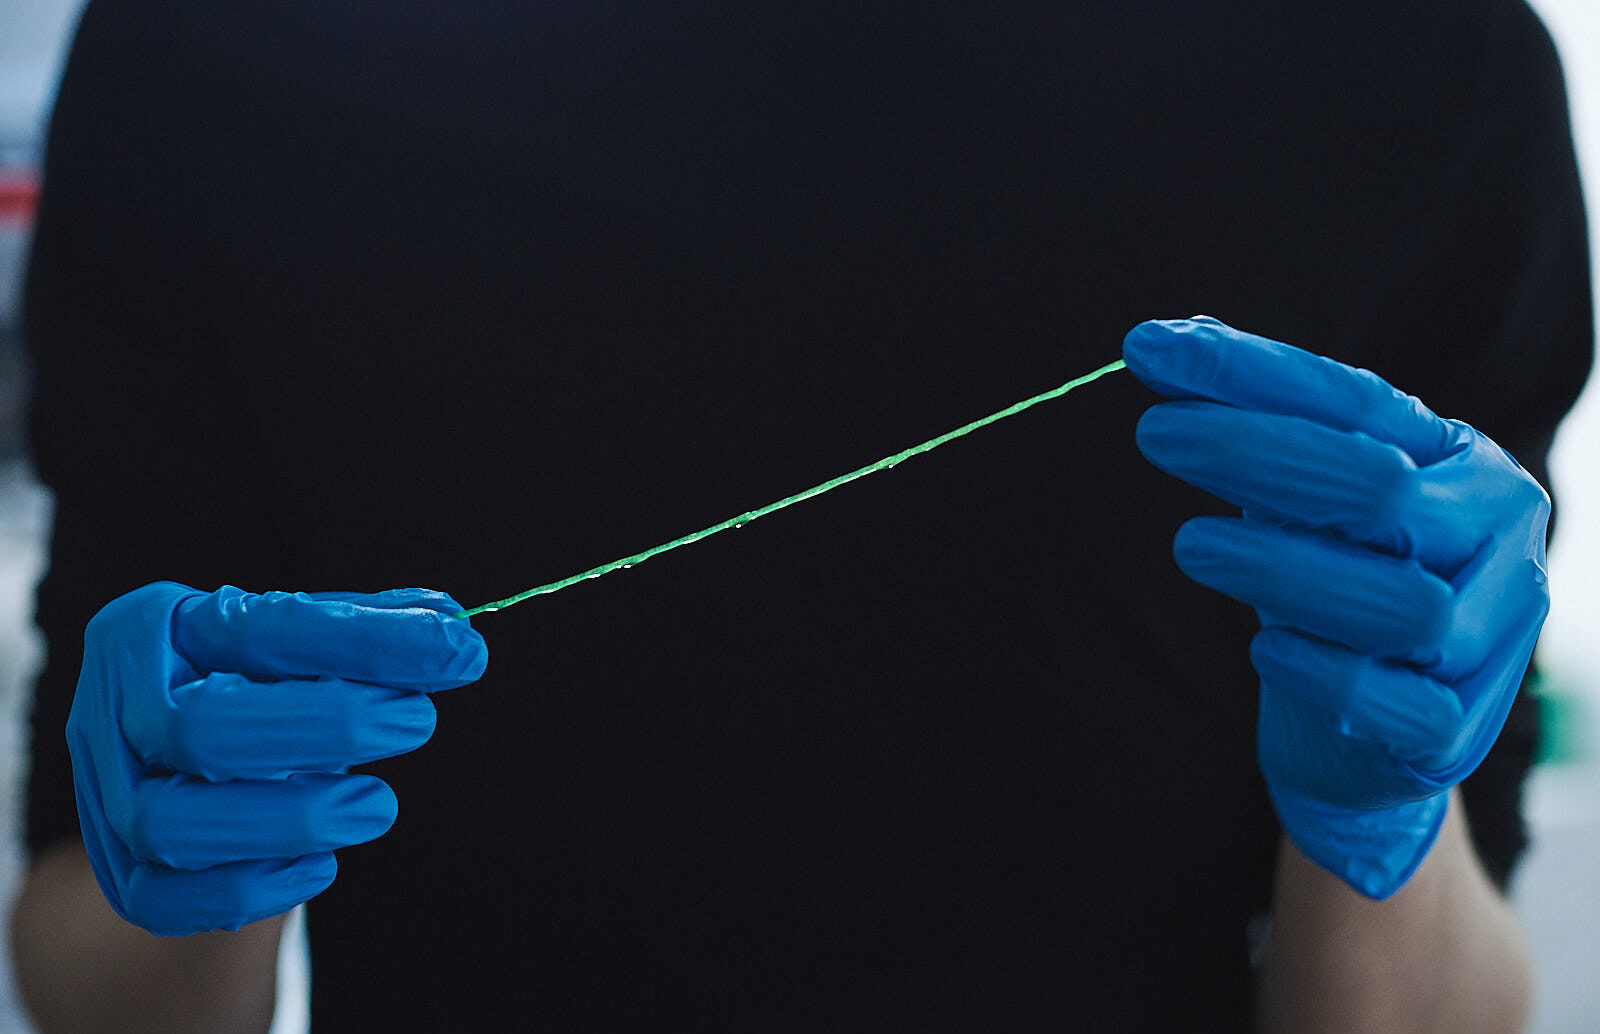 An image of two blue-gloved hands holding a green strand of Werewool's thread. Photographed by Jon Brown.